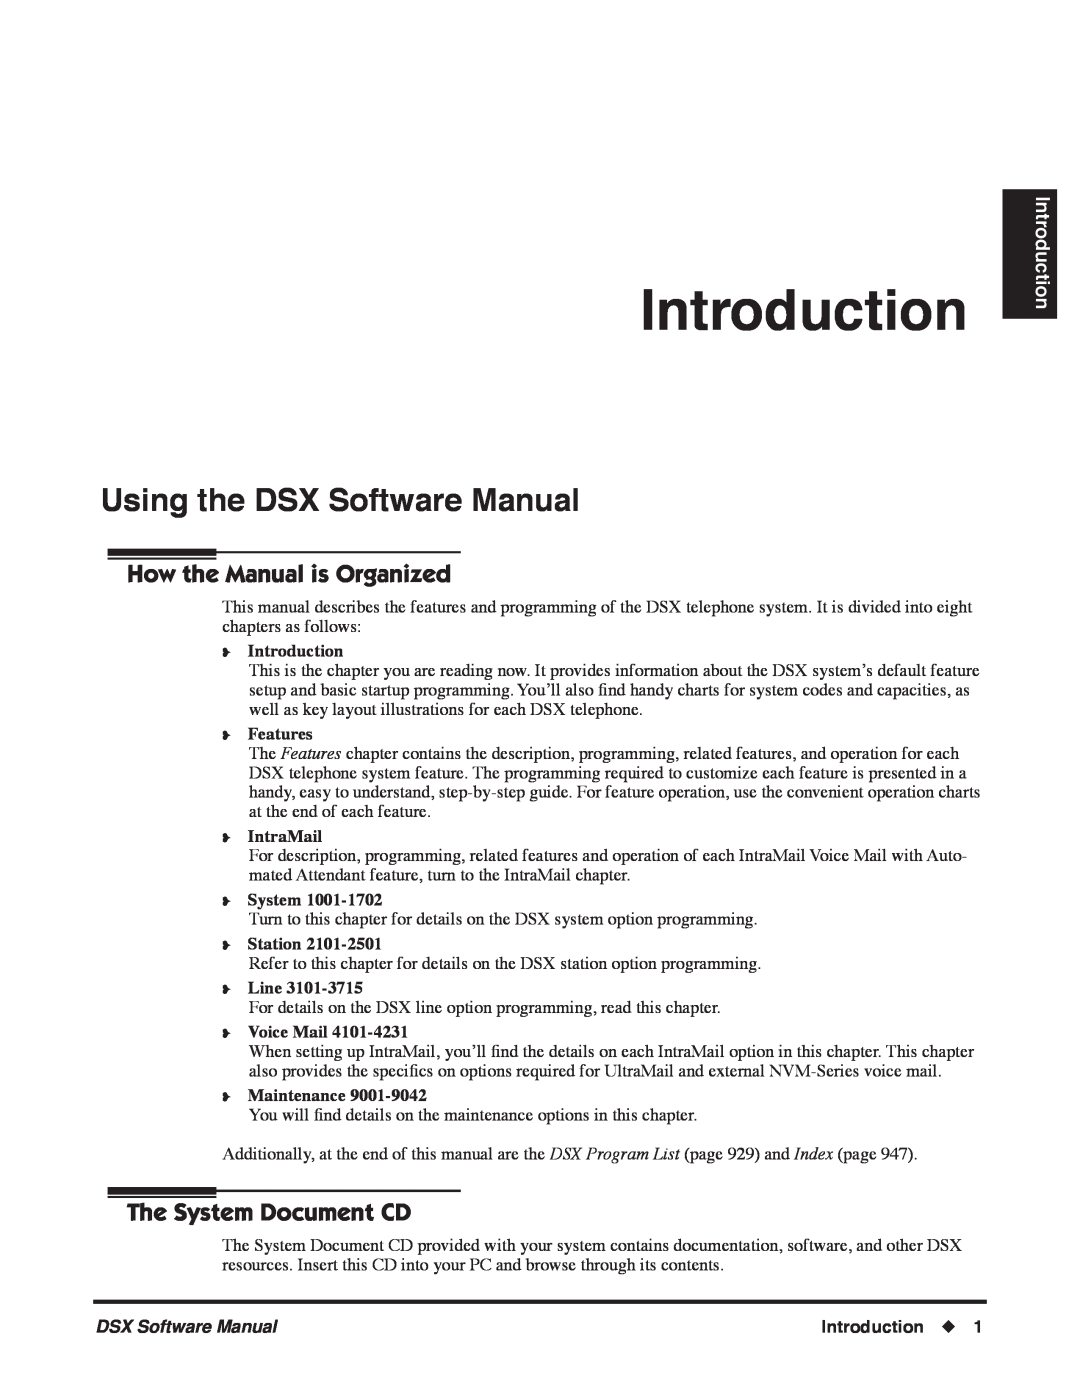 NEC P Introduction, Using the DSX Software Manual, How the Manual is Organized, The System Document CD, Features, Station 